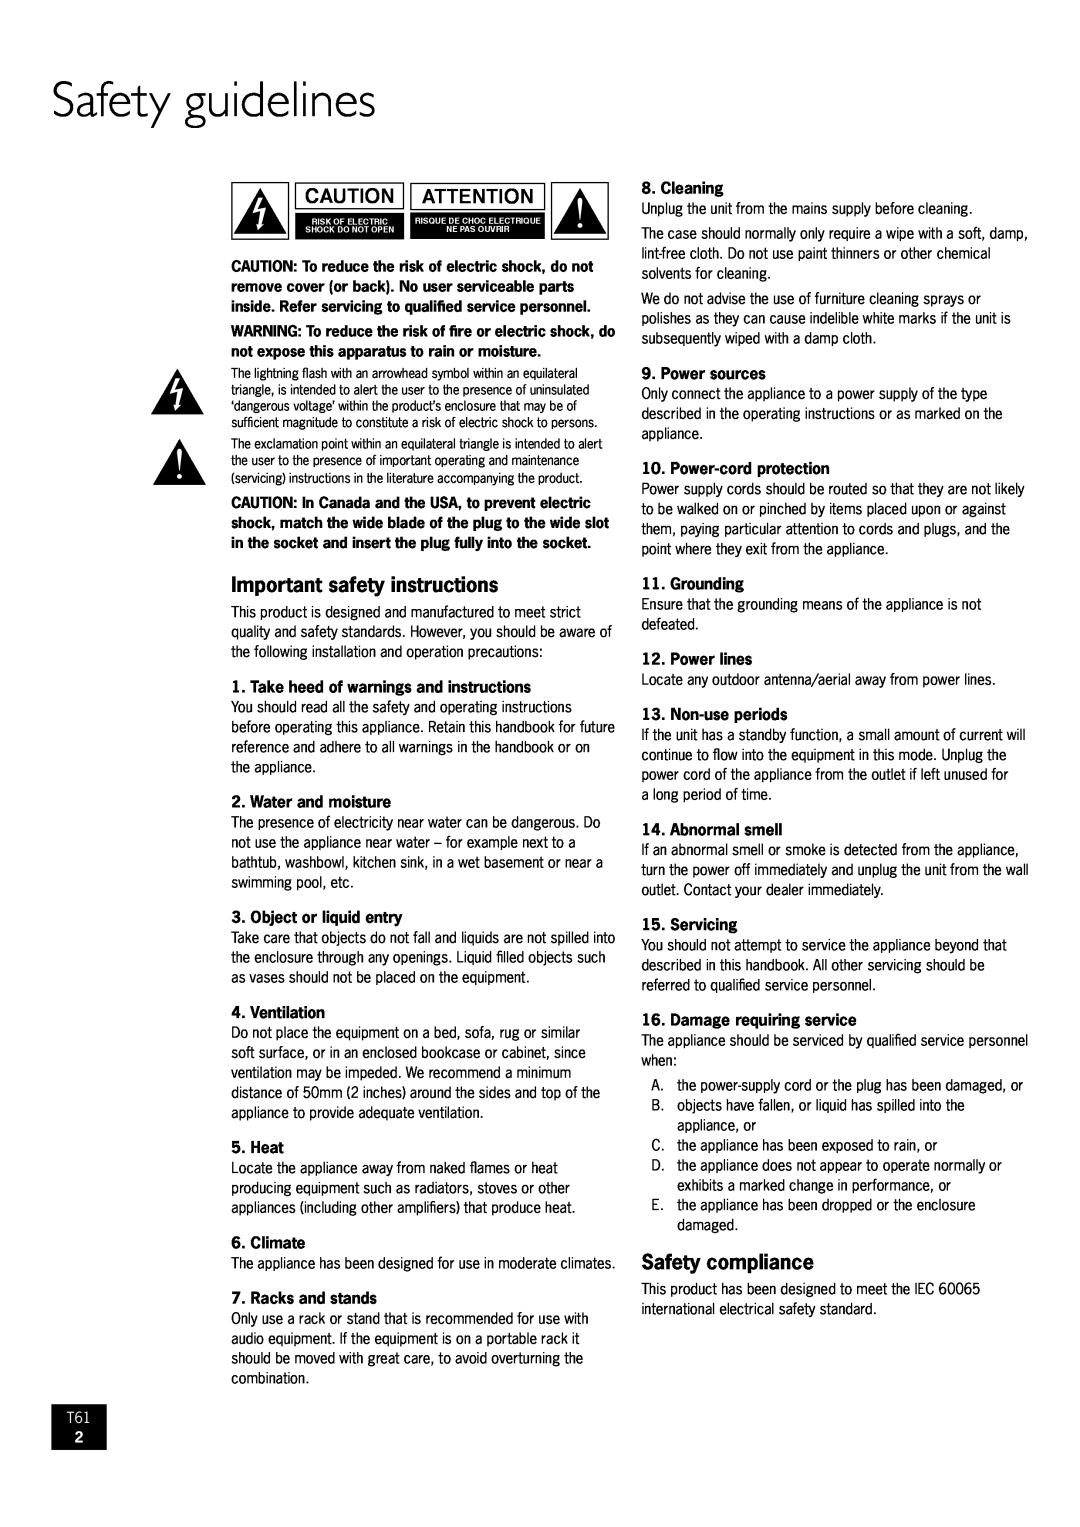 Arcam AM/FM Tuner T61 manual Safety guidelines, Important safety instructions, Safety compliance 